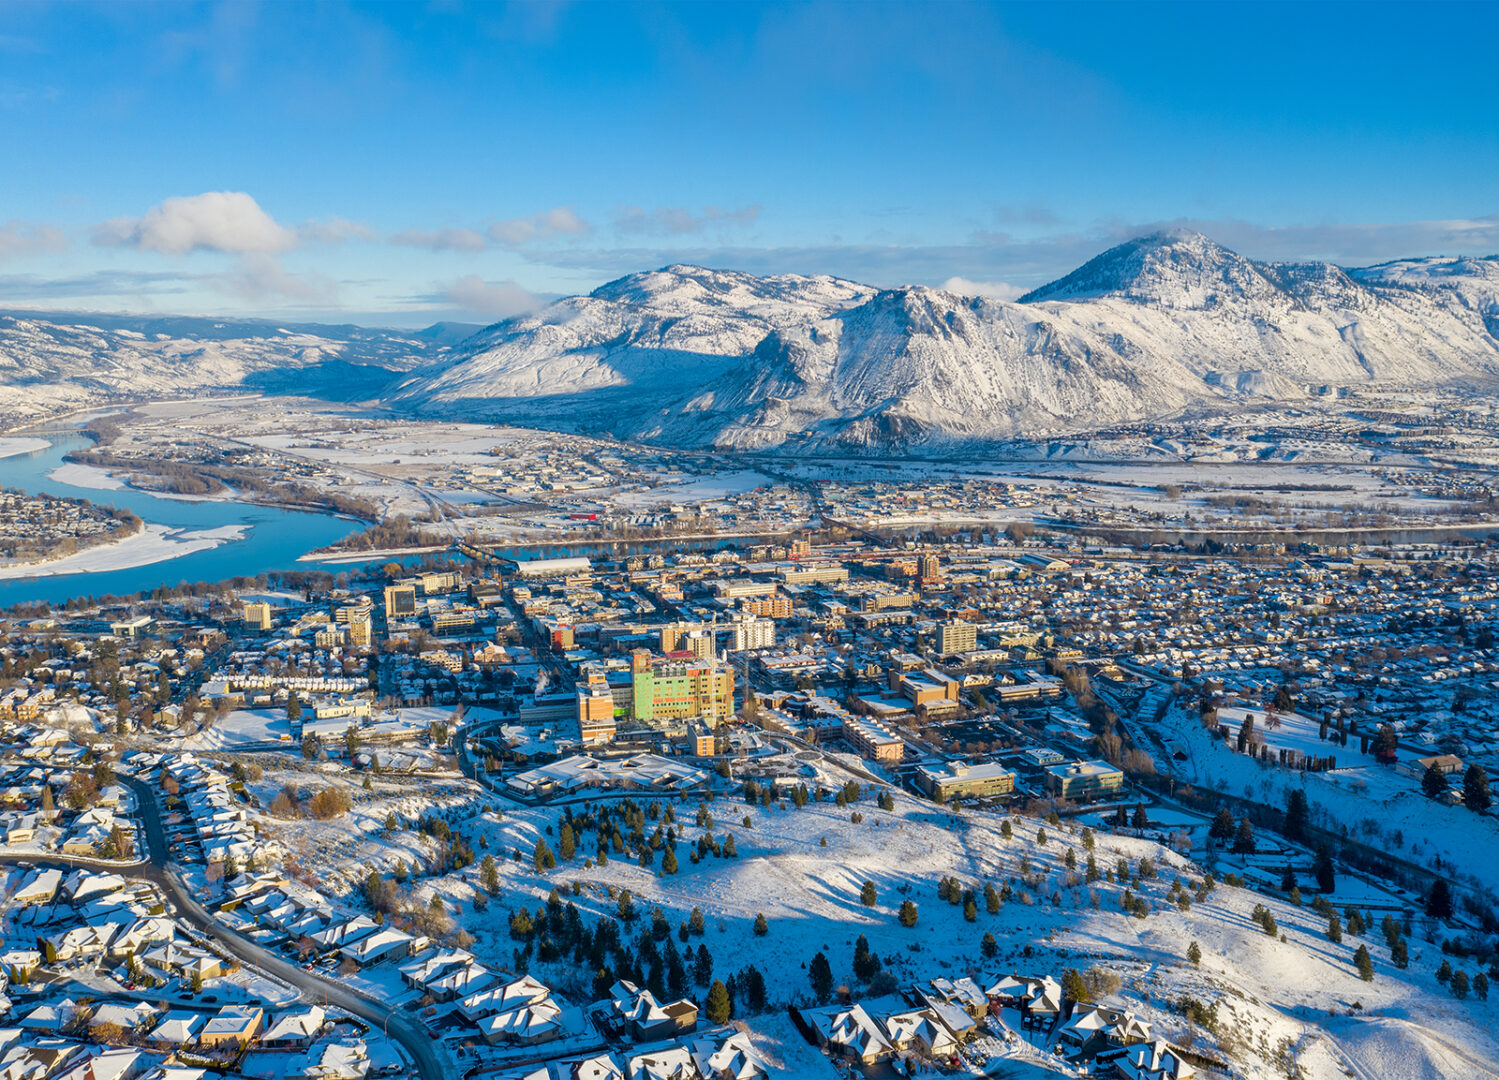 Kamloops City Aerial view with mountains buildings and snow HDR